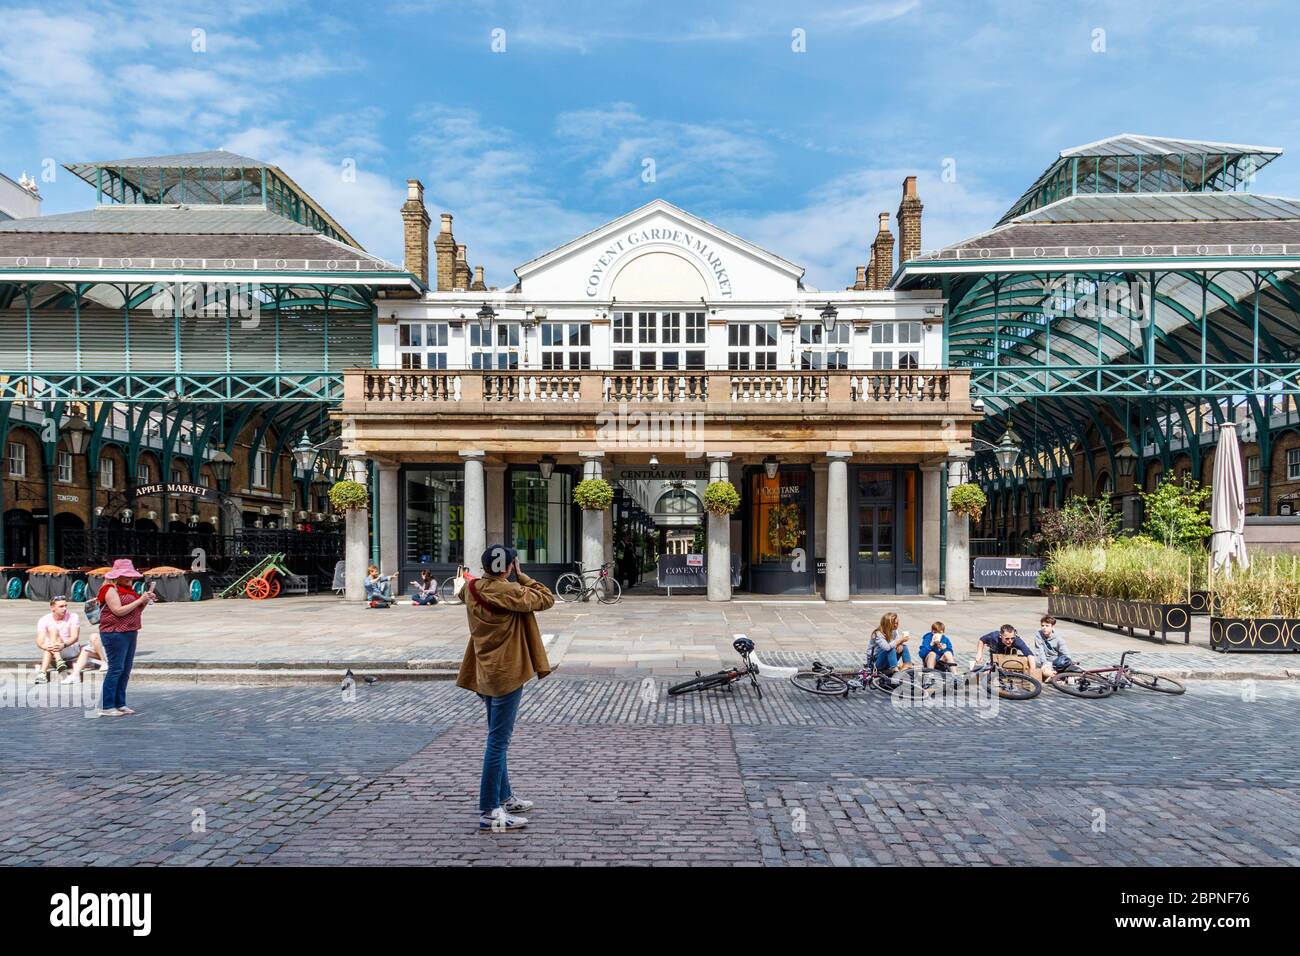 Covent Garden Market, normally busy, almost deserted on a weekend during the coronavirus pandemic lockdown, London, UK Stock Photo